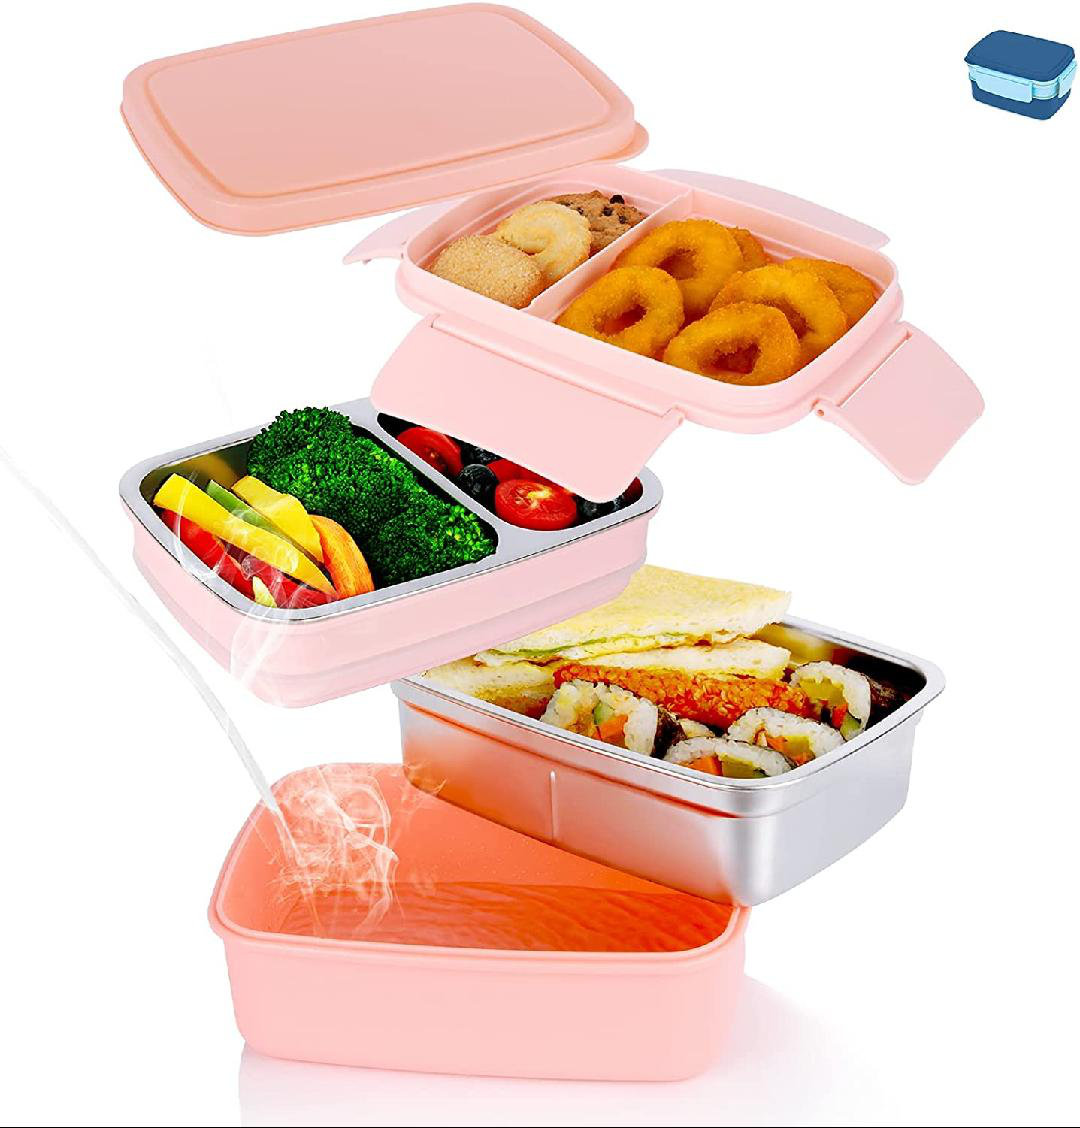 Portable Lunch Box For Kids School Microwave Bento Box With Movable Compartmenrs